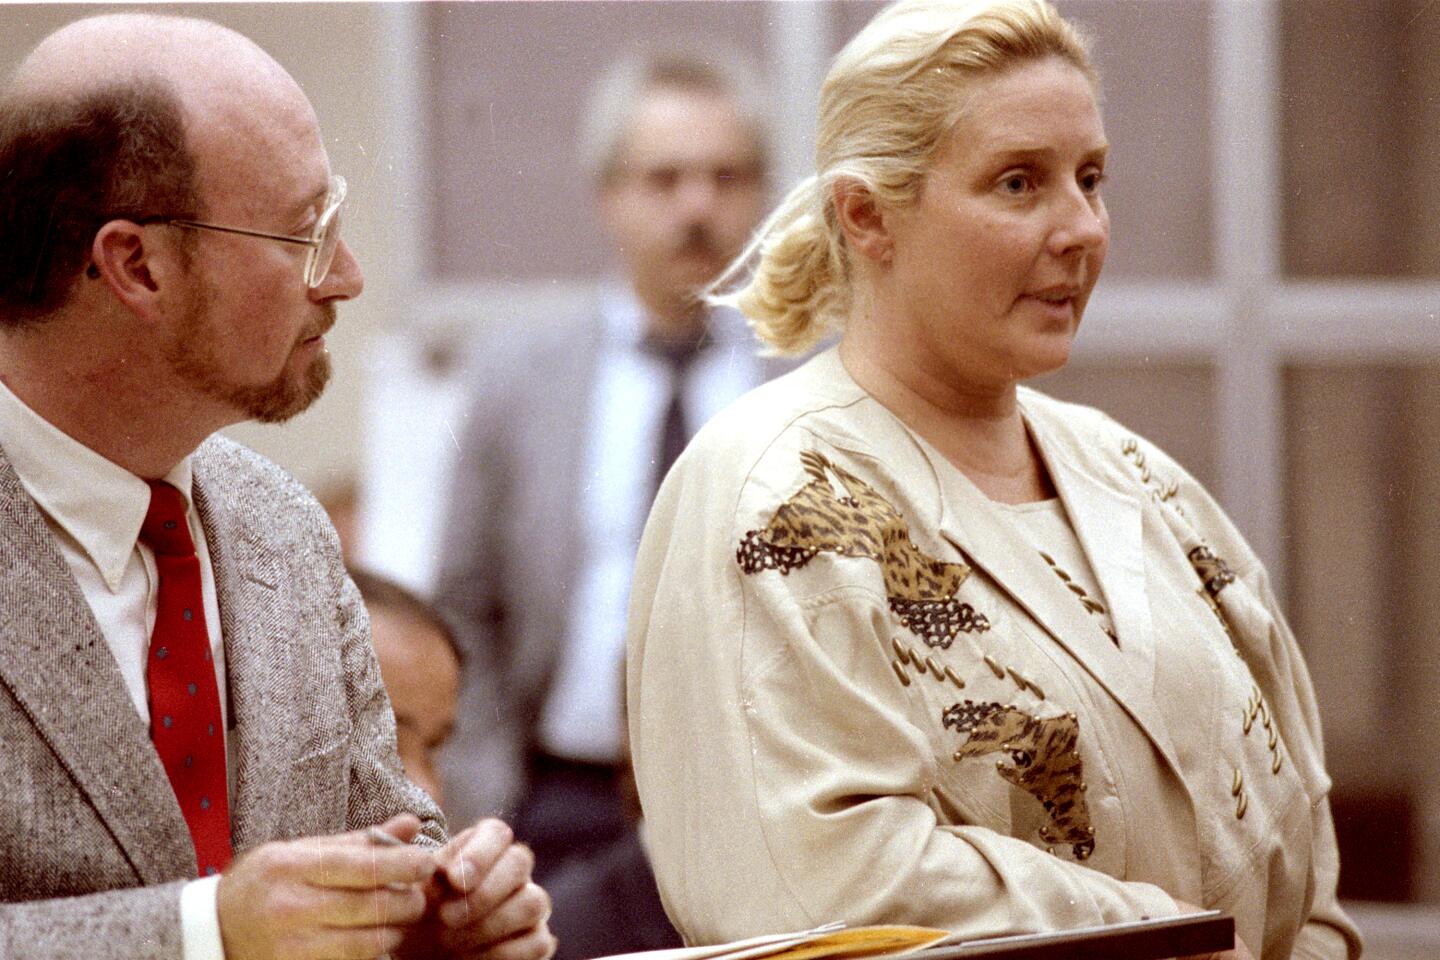 Broderick pleads not guilty on Nov. 15, 1989. With her is attorney Mark Wolf.